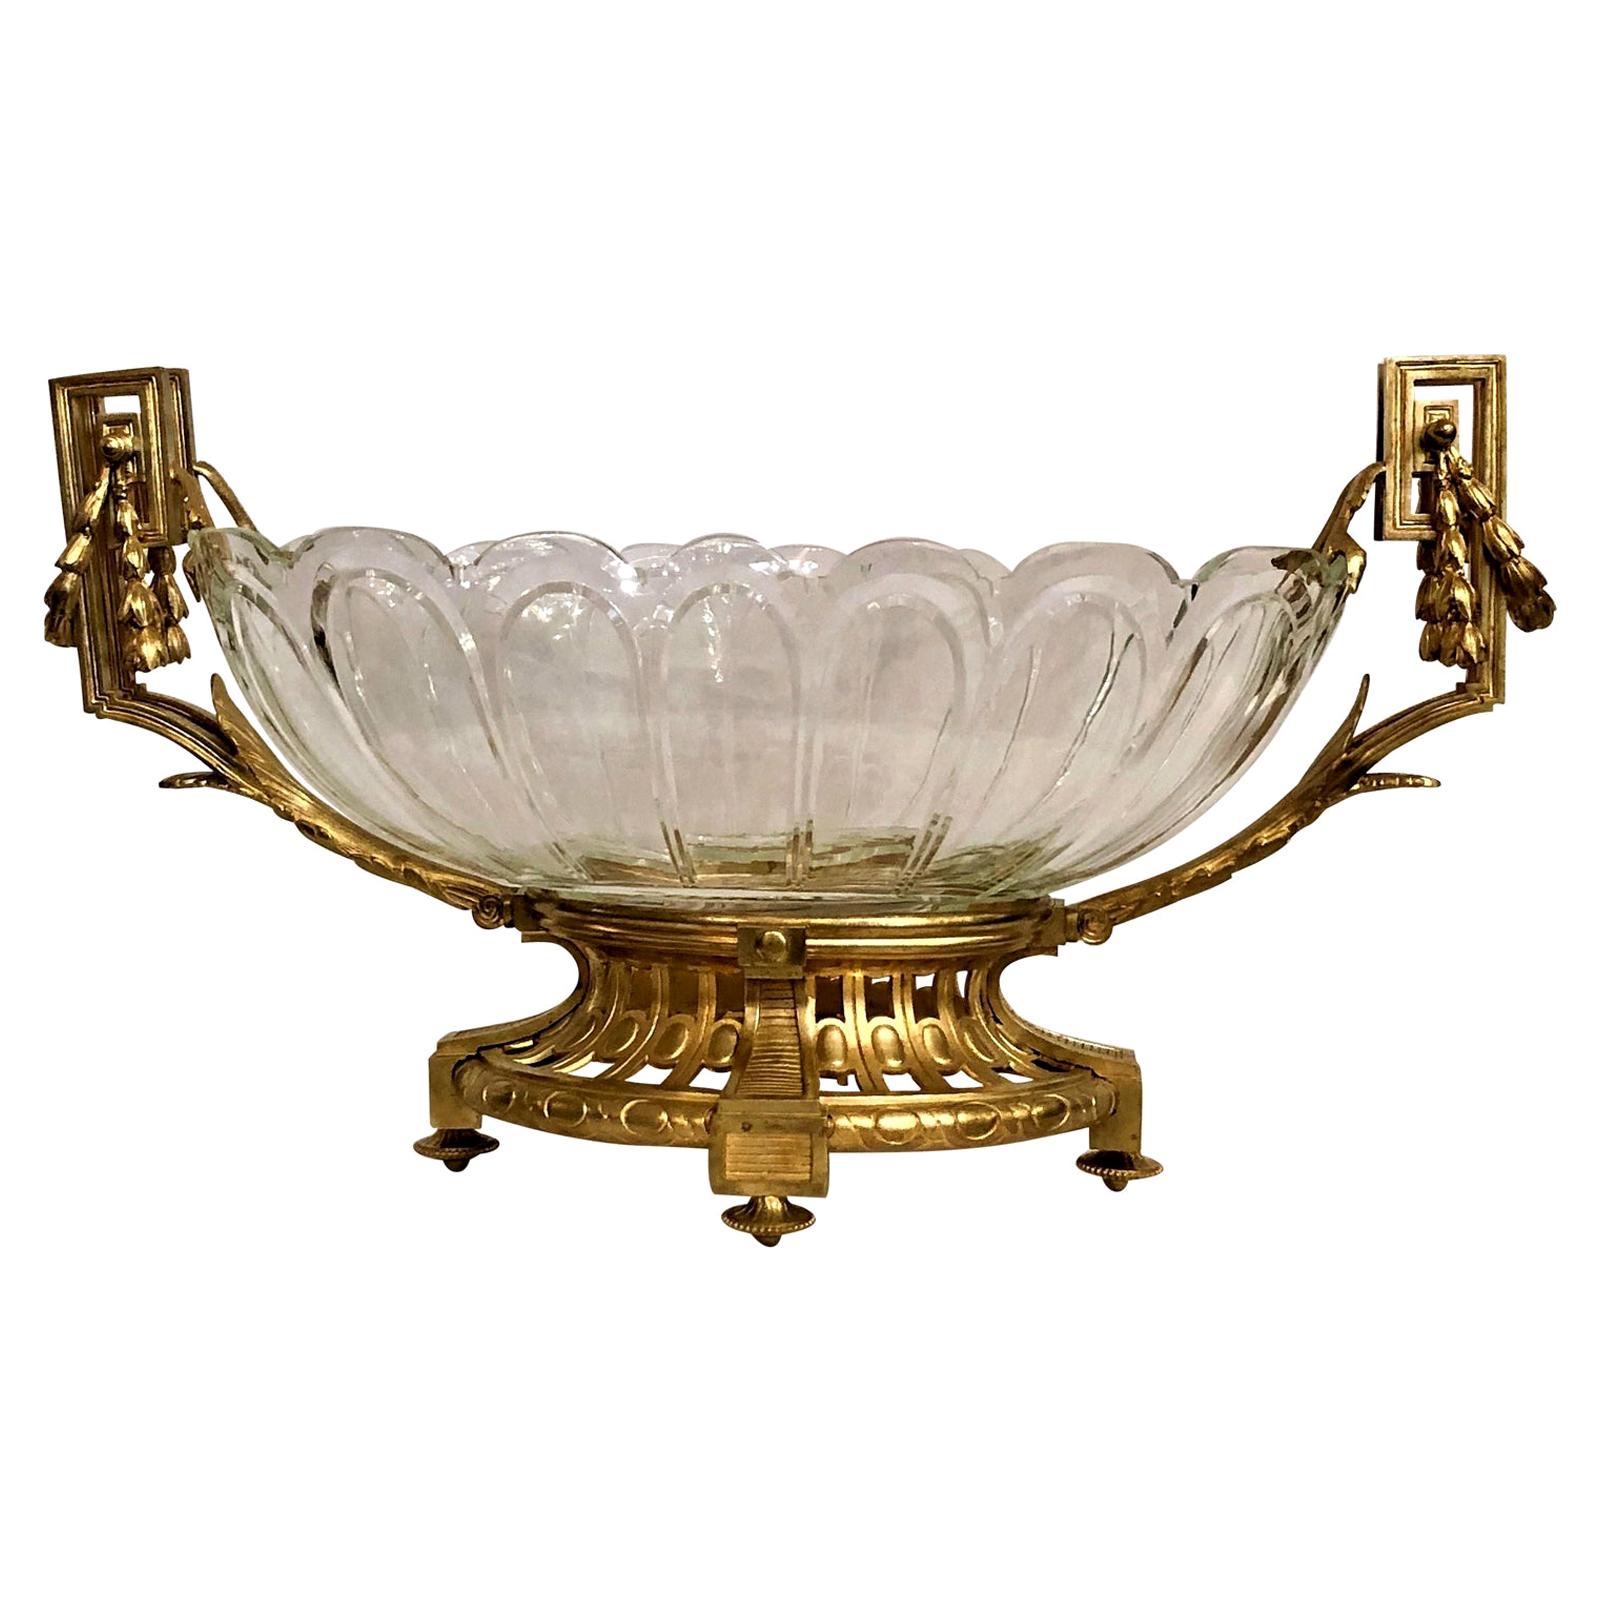 Antique French Baccarat Crystal and Gold Bronze Centerpiece Epergne, circa 1880